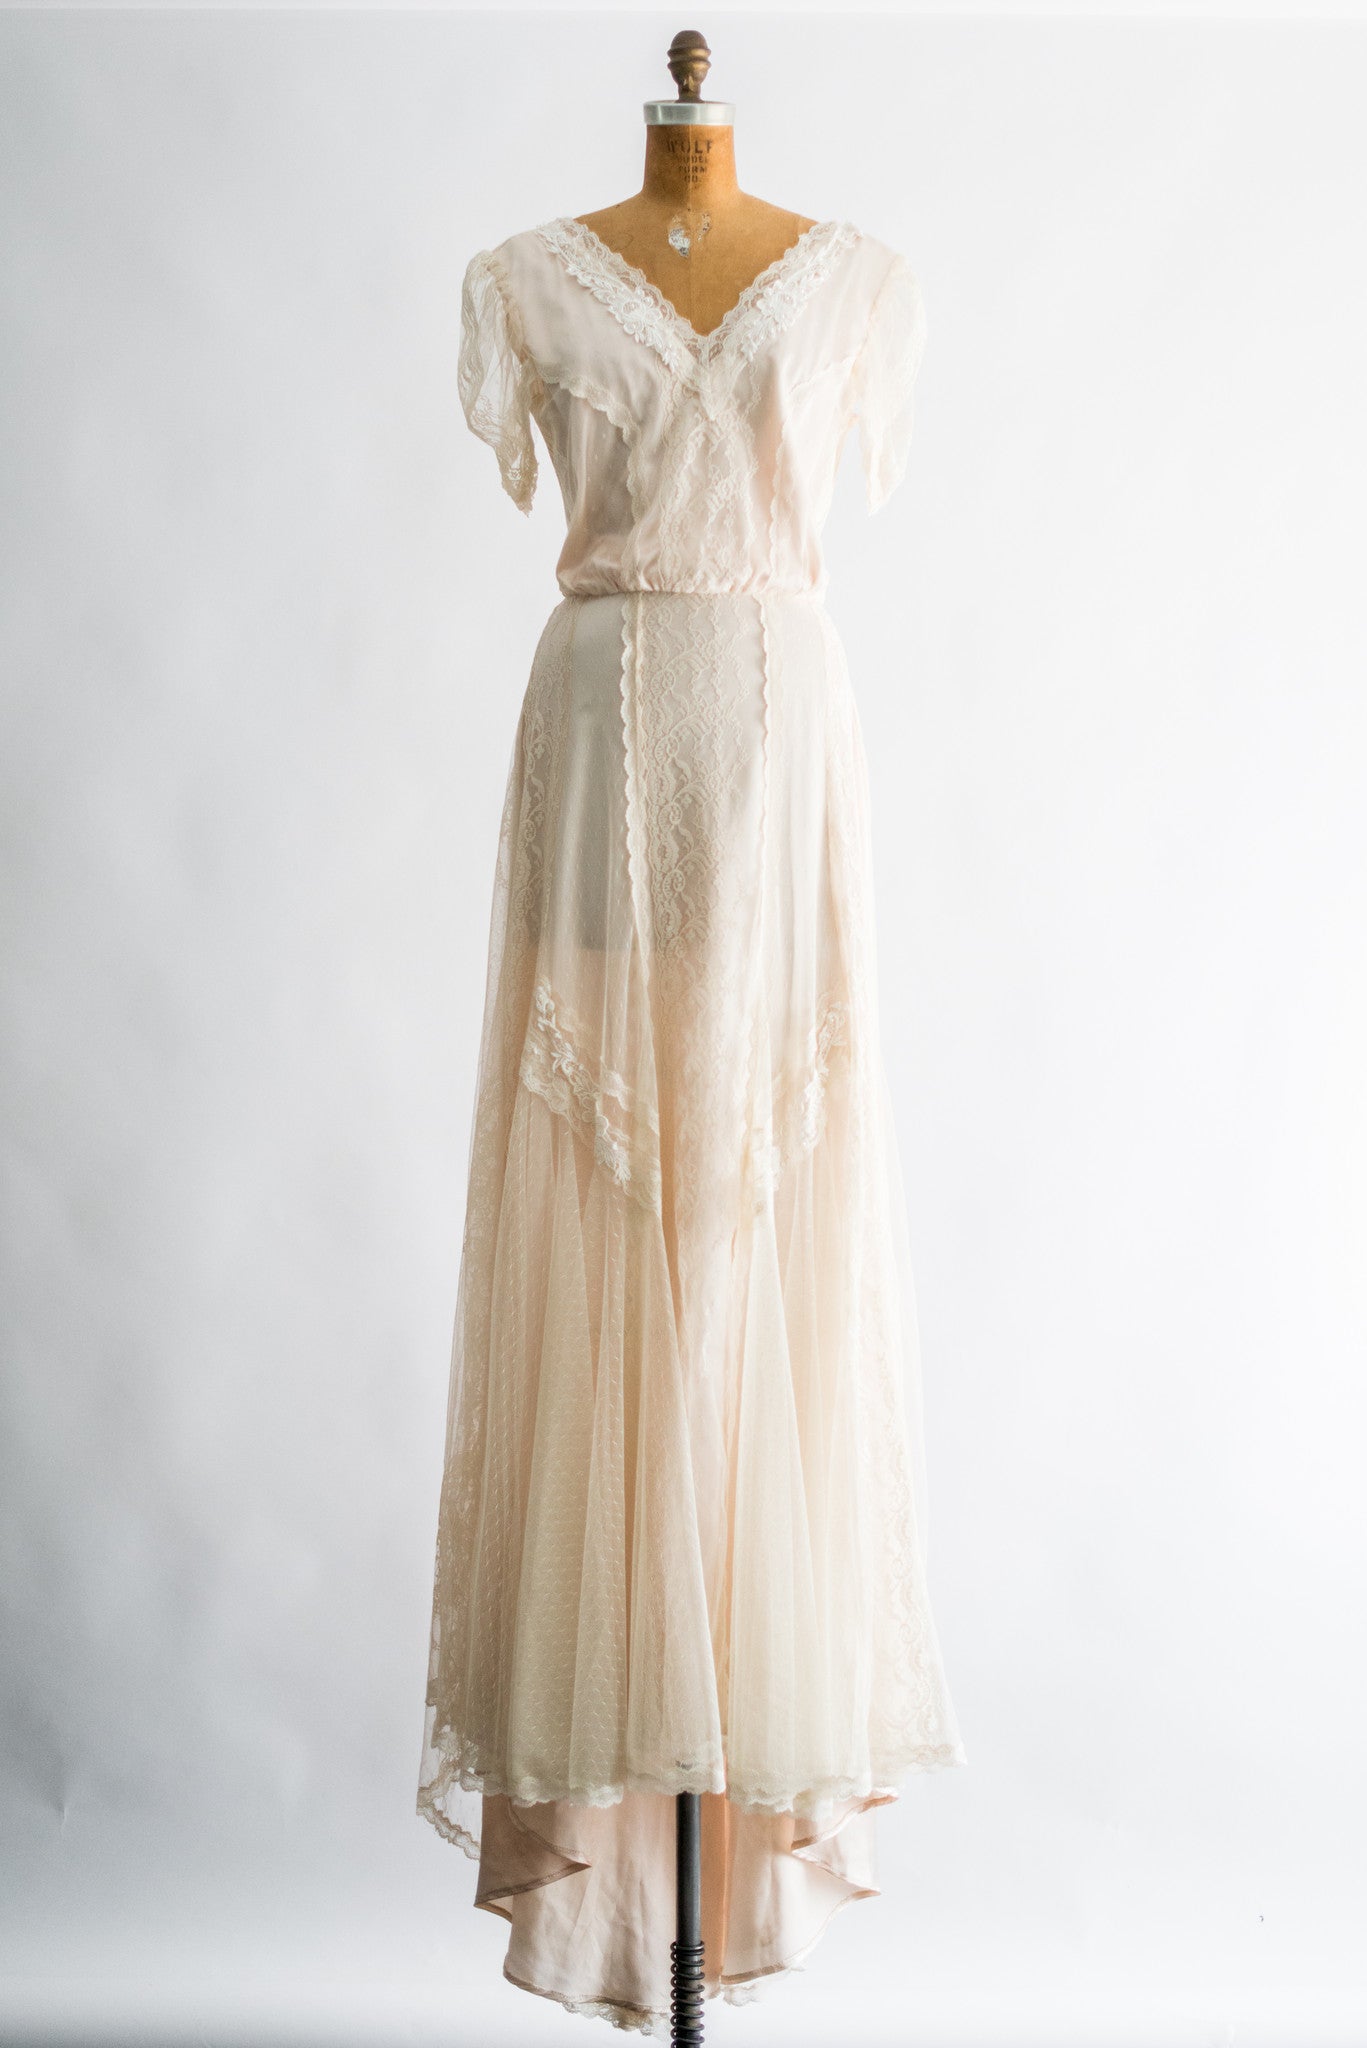 1970s Ivory/Shell Lace Cap Sleeves Trained Gown - M